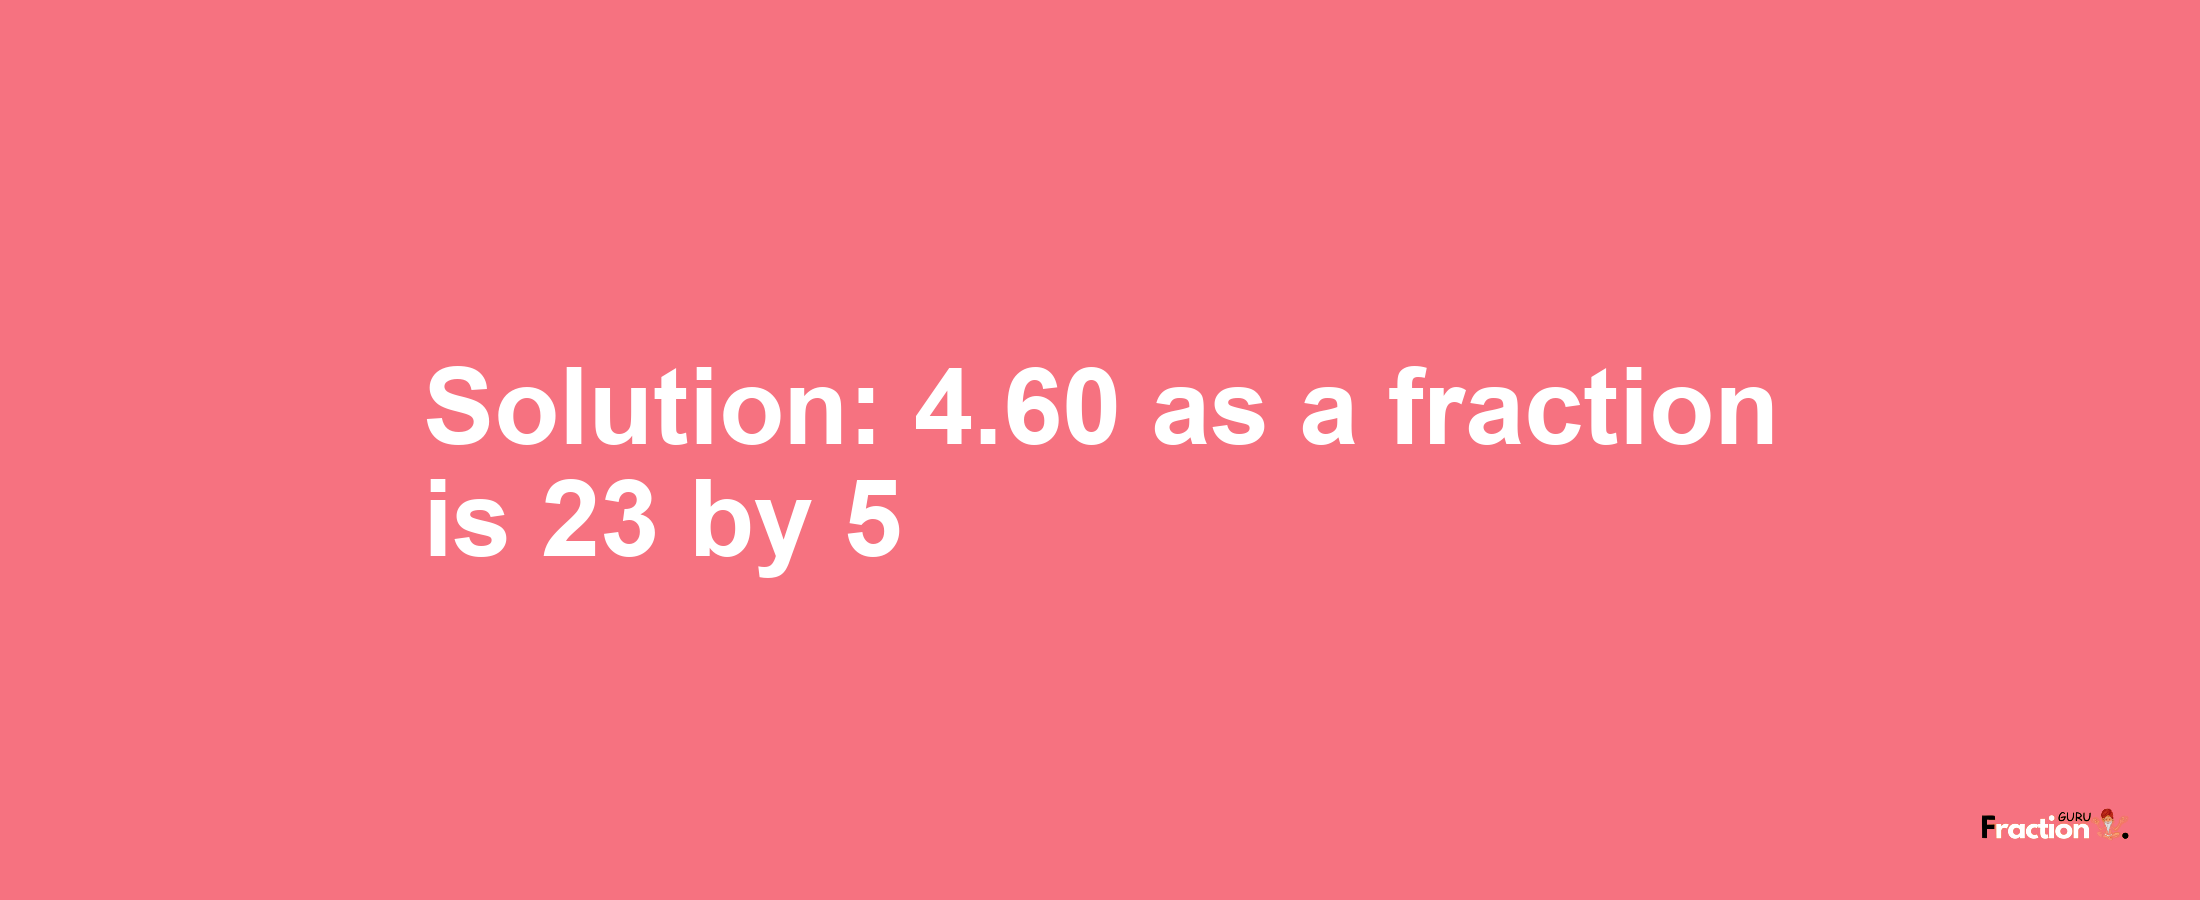 Solution:4.60 as a fraction is 23/5